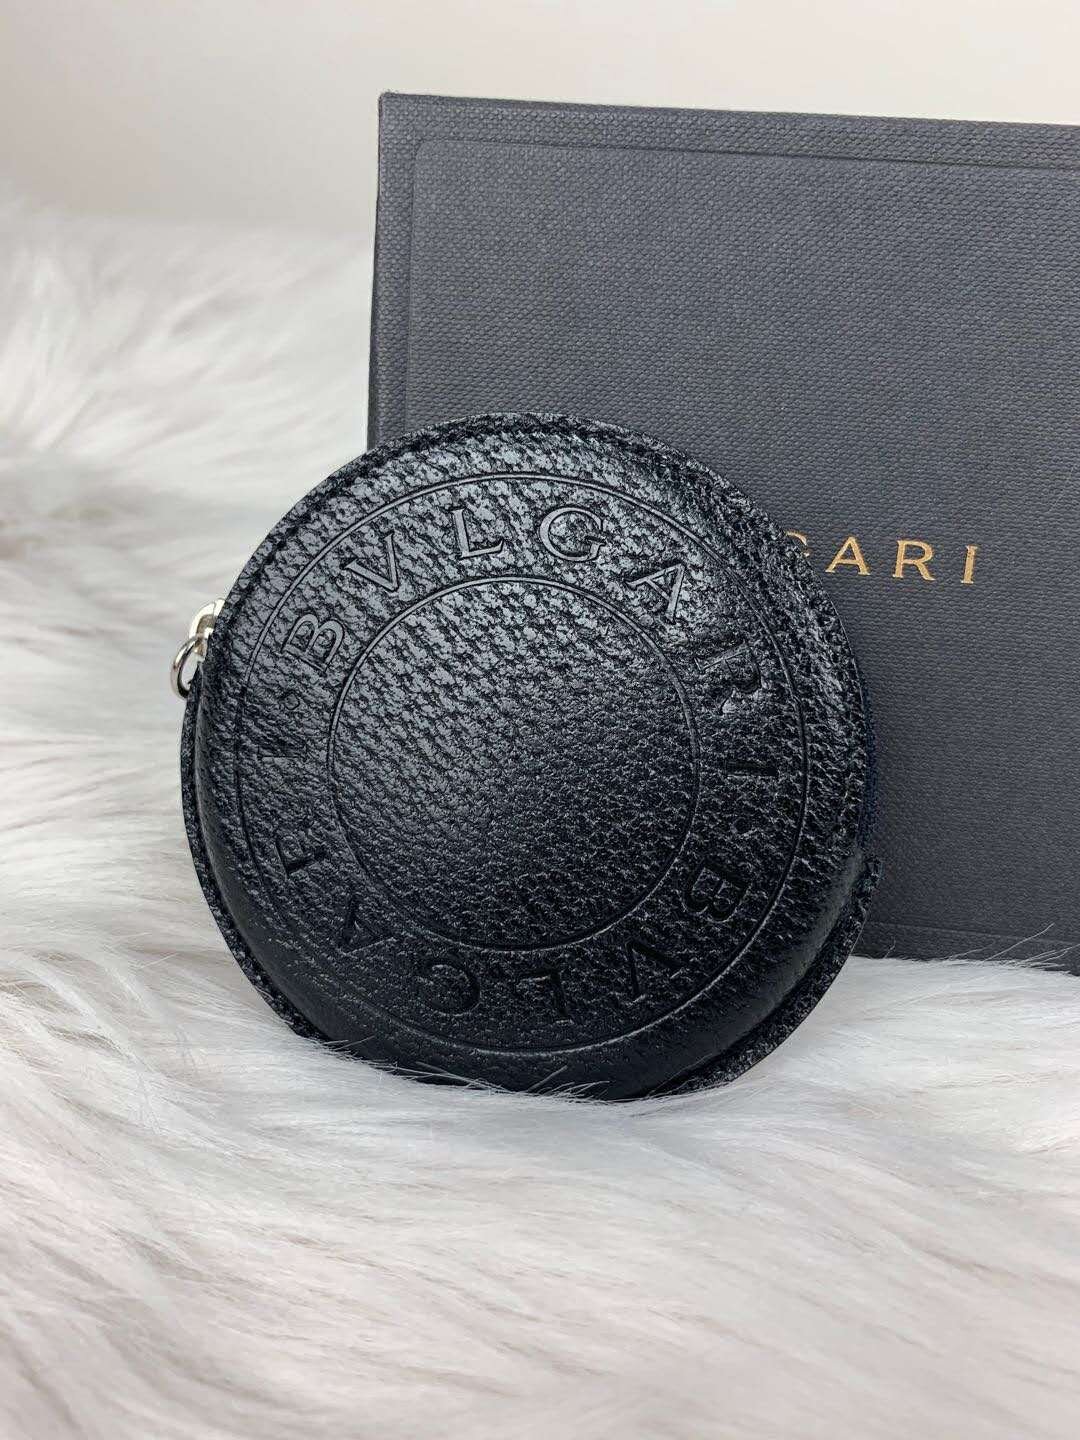 Bvlgari coin purse (new with tag 